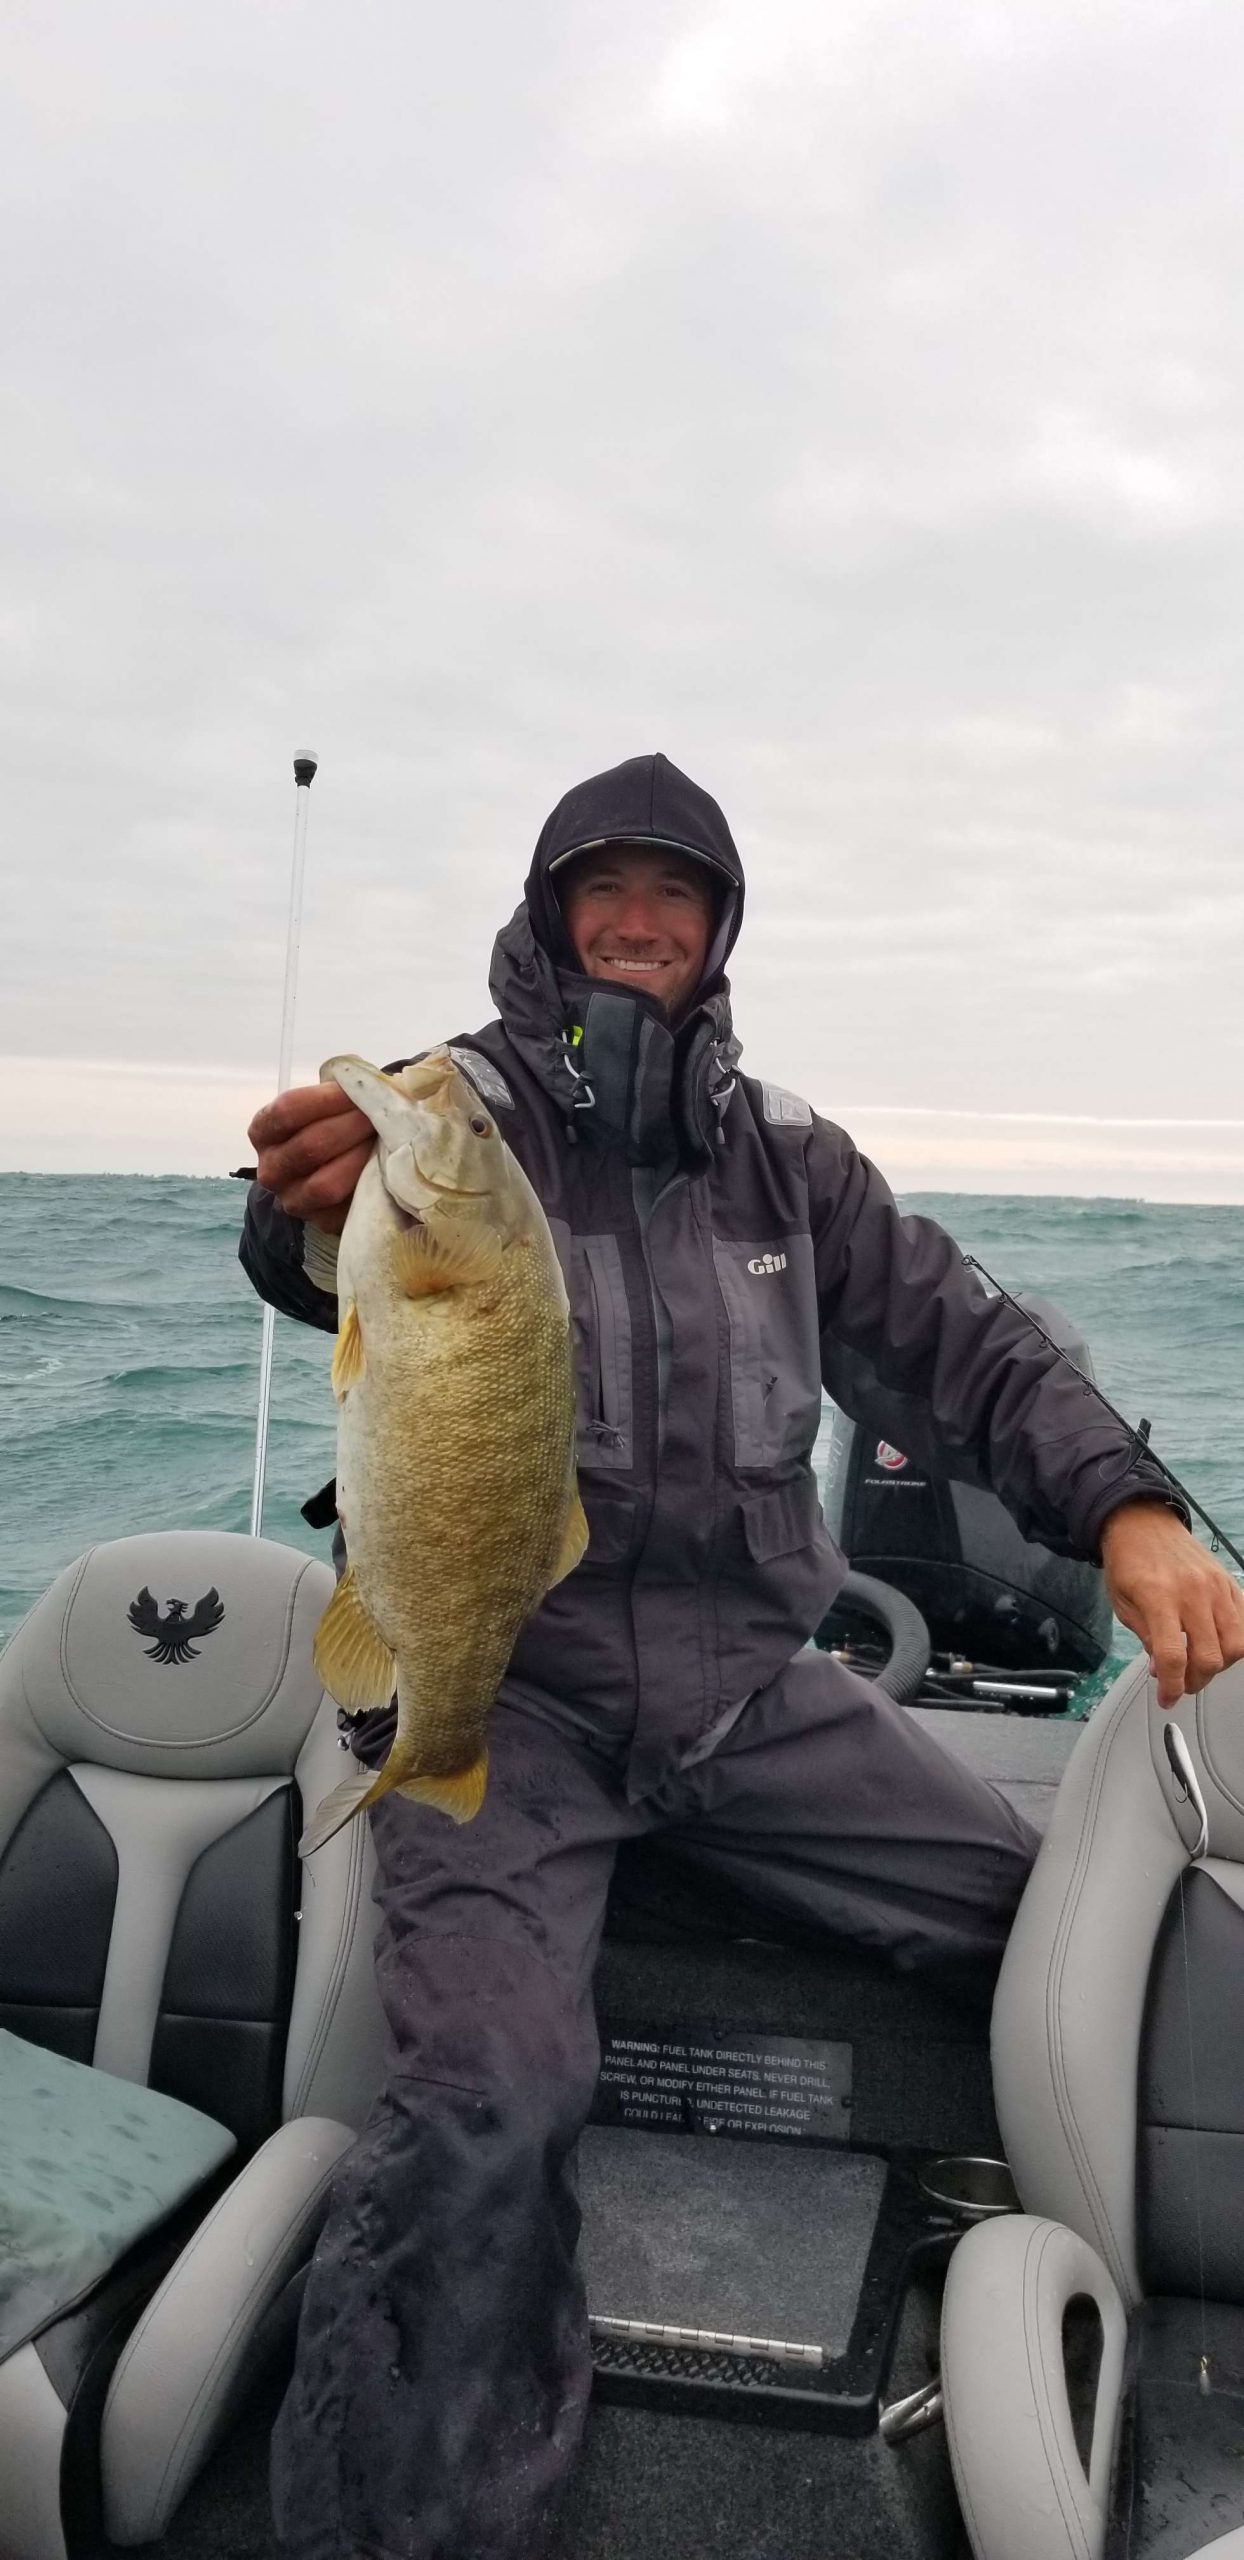 Three in the boat for Luke Palmer. It's football season on Lake St. Clair.